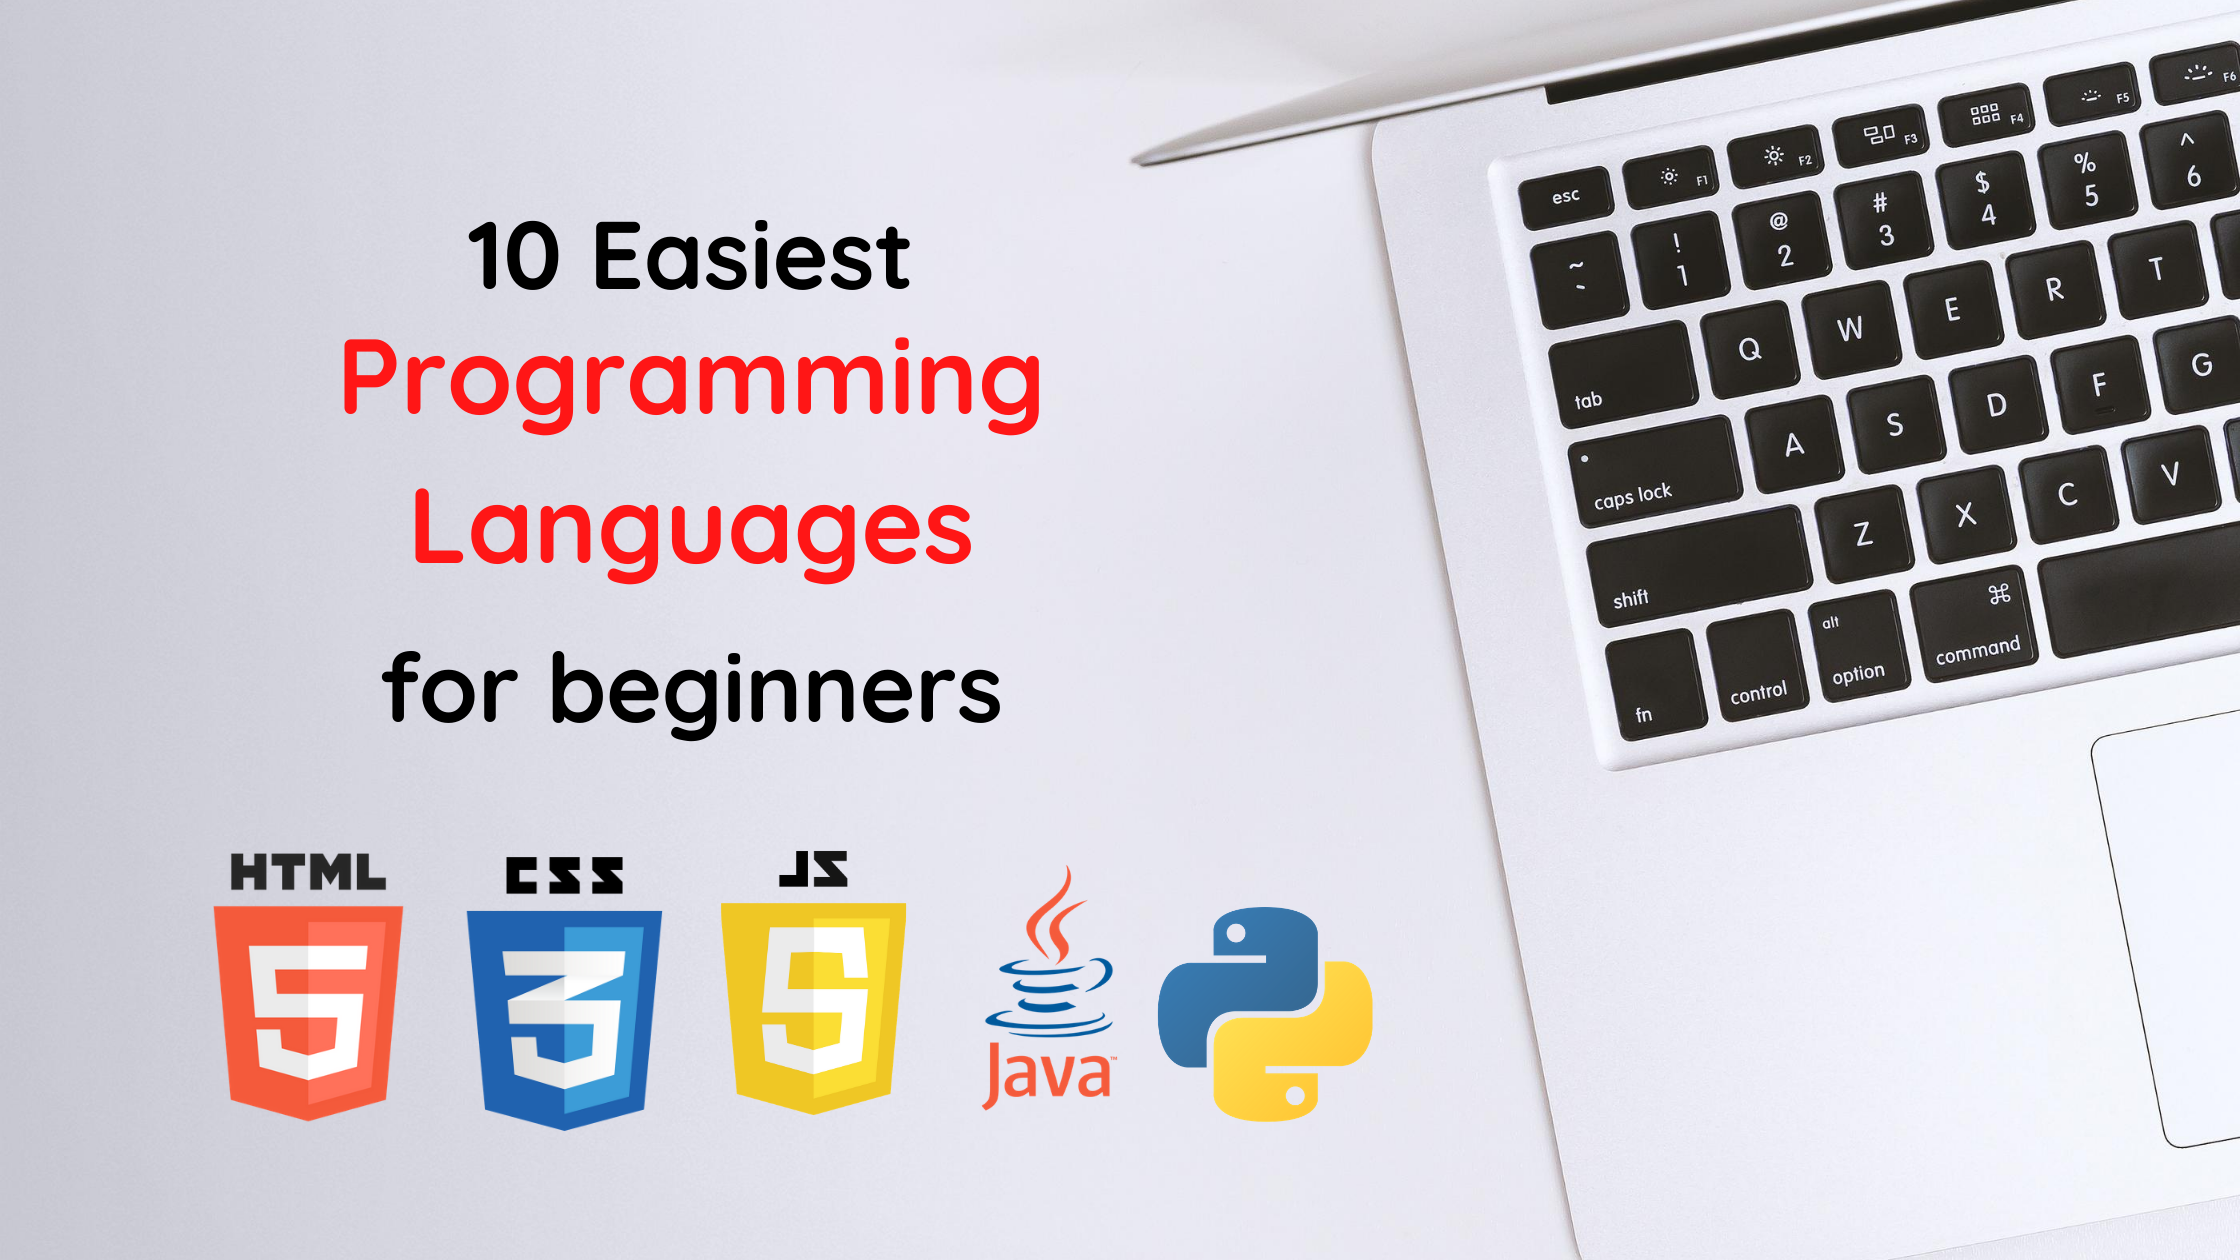 1o easiest programming languages for beginners